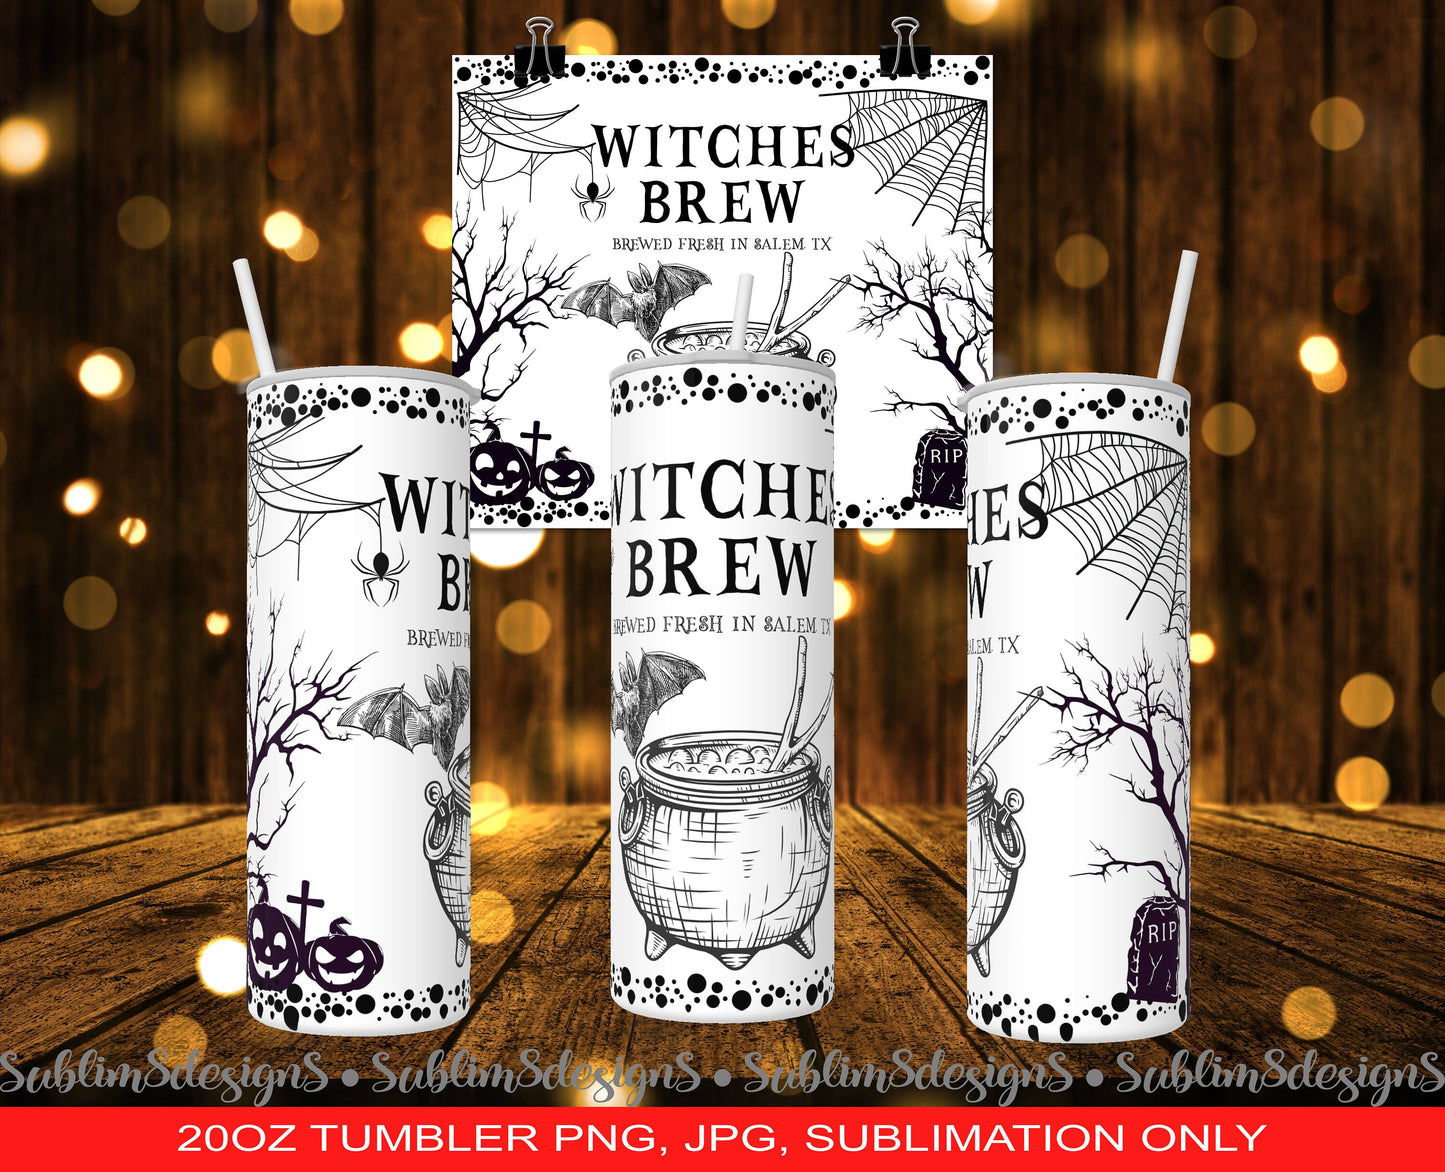 Witches Brew Brewed Fresh In Salem, TX 16oz frosted glass and 20oz Tumbler Design PNG and JPG Only